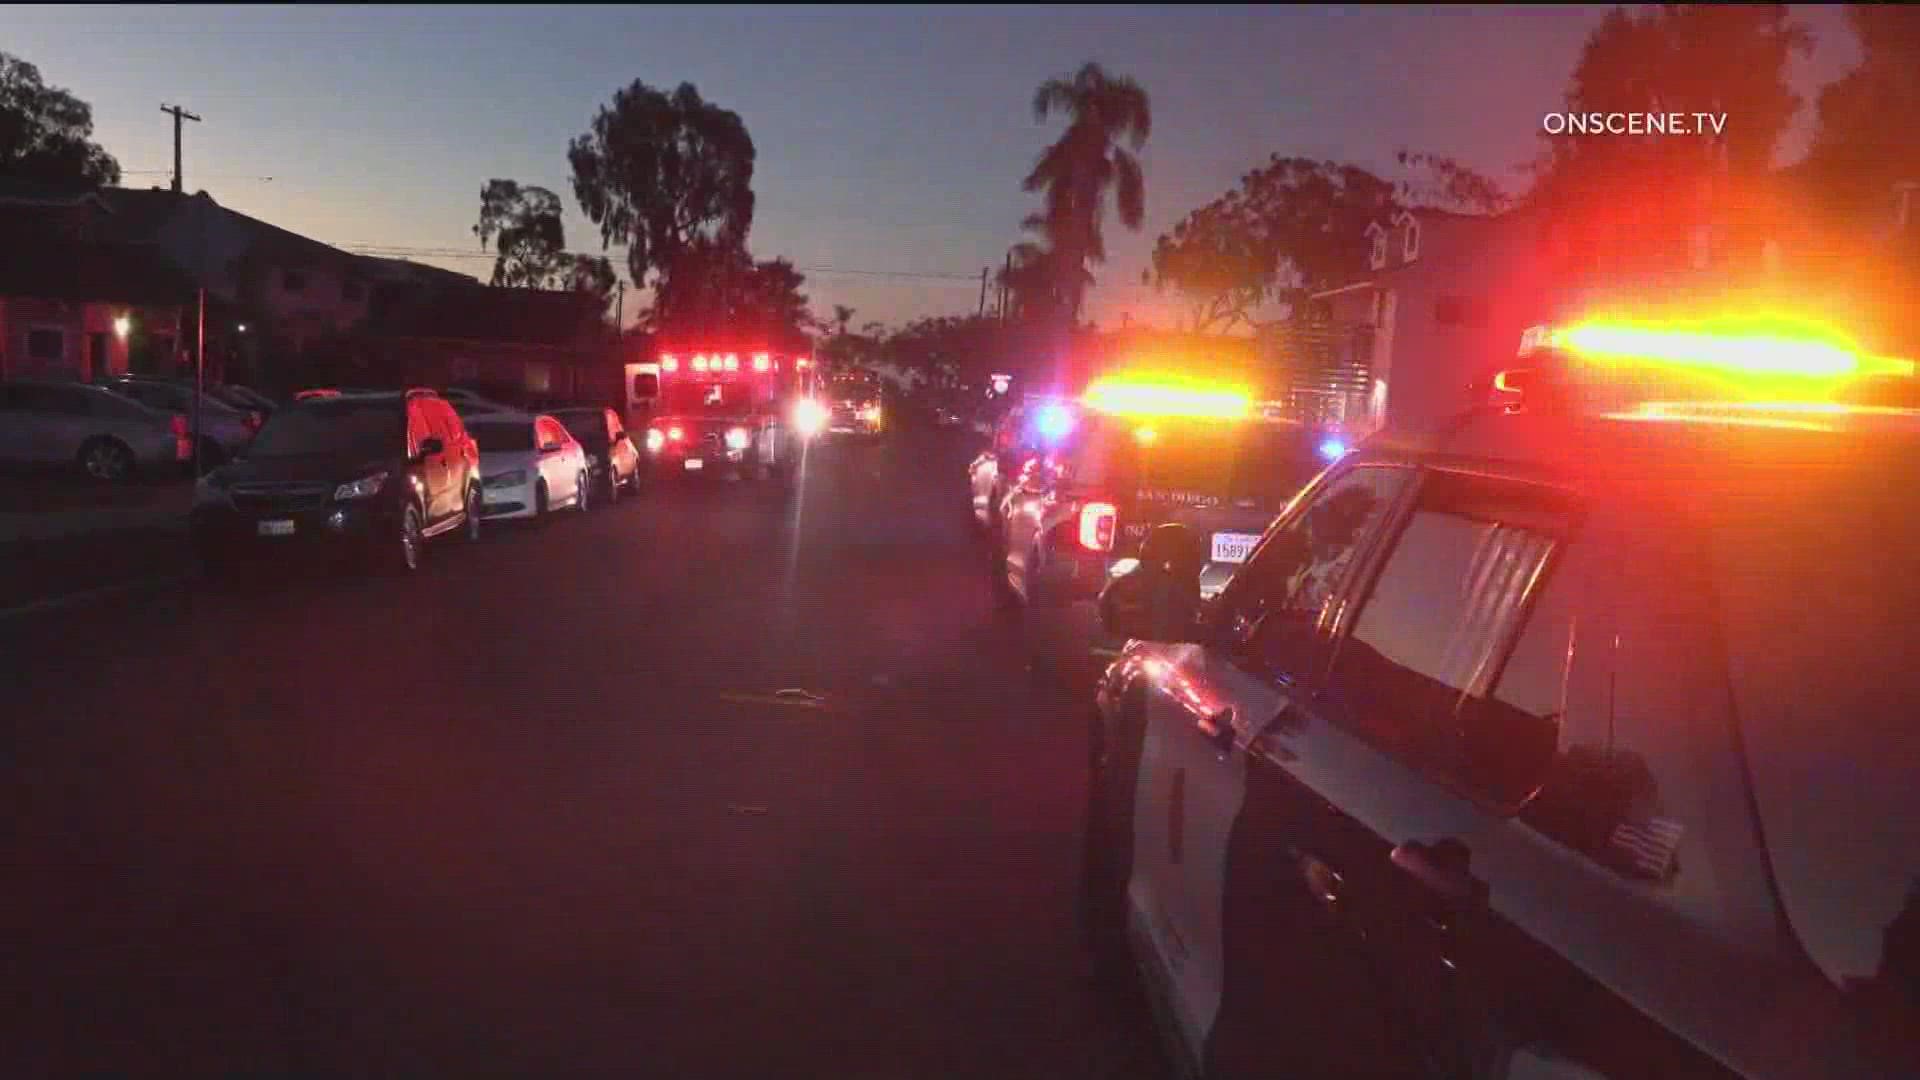 First responders revived two of them with Narcan -- a drug used to counteract the effects of fentanyl -- and transported them to a hospital, SDPD said.